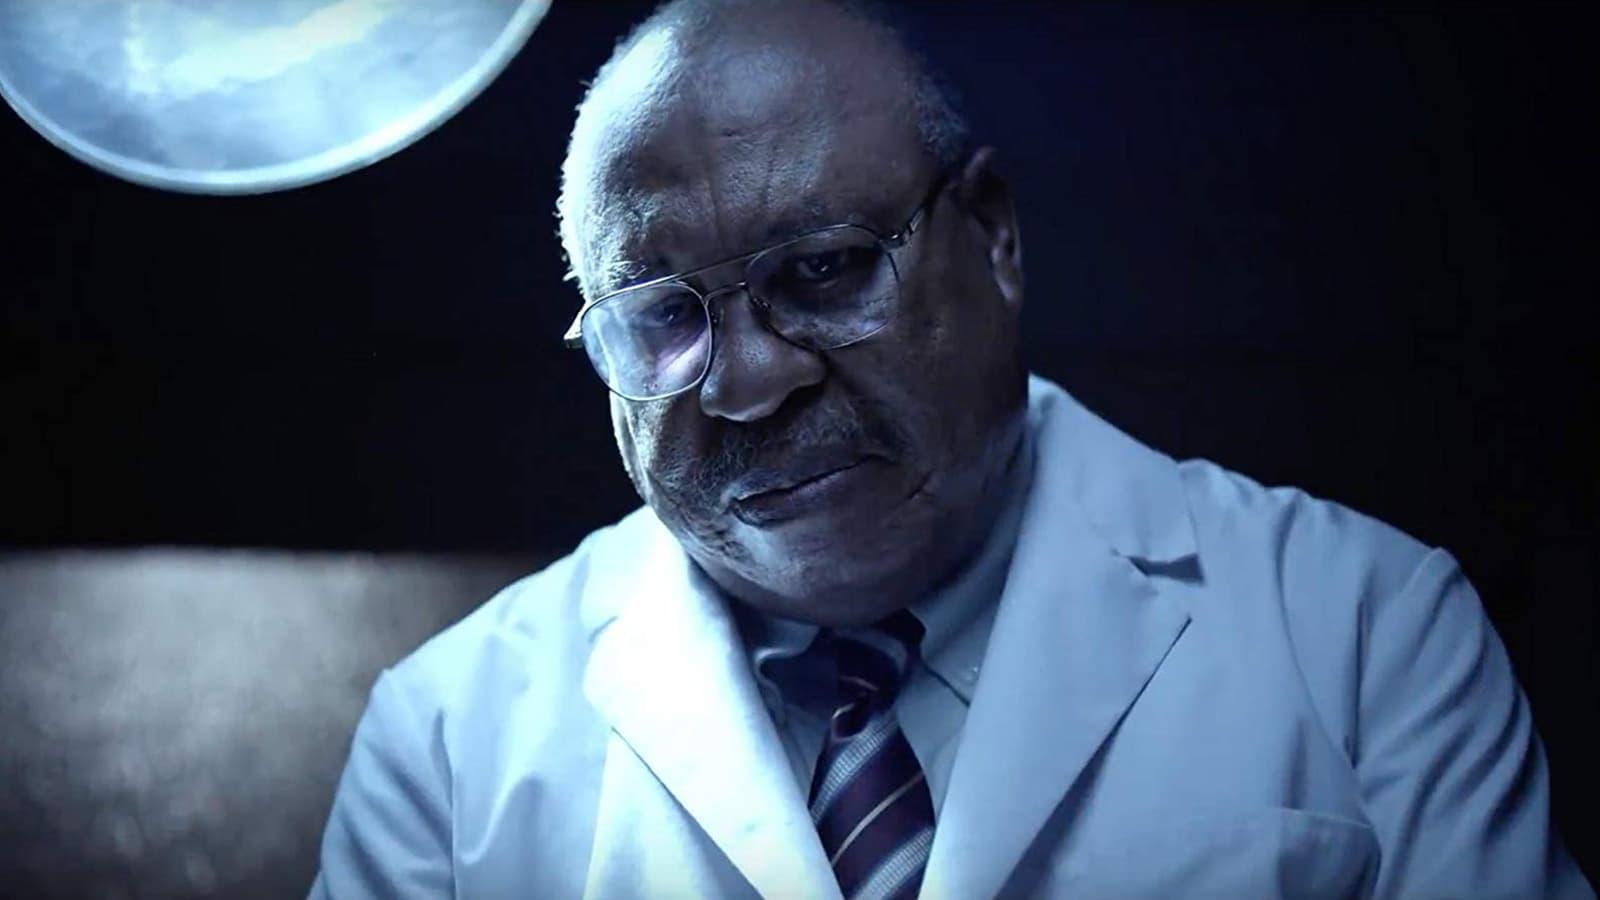 Gosnell: The Trial of America's Biggest Serial Killer backdrop